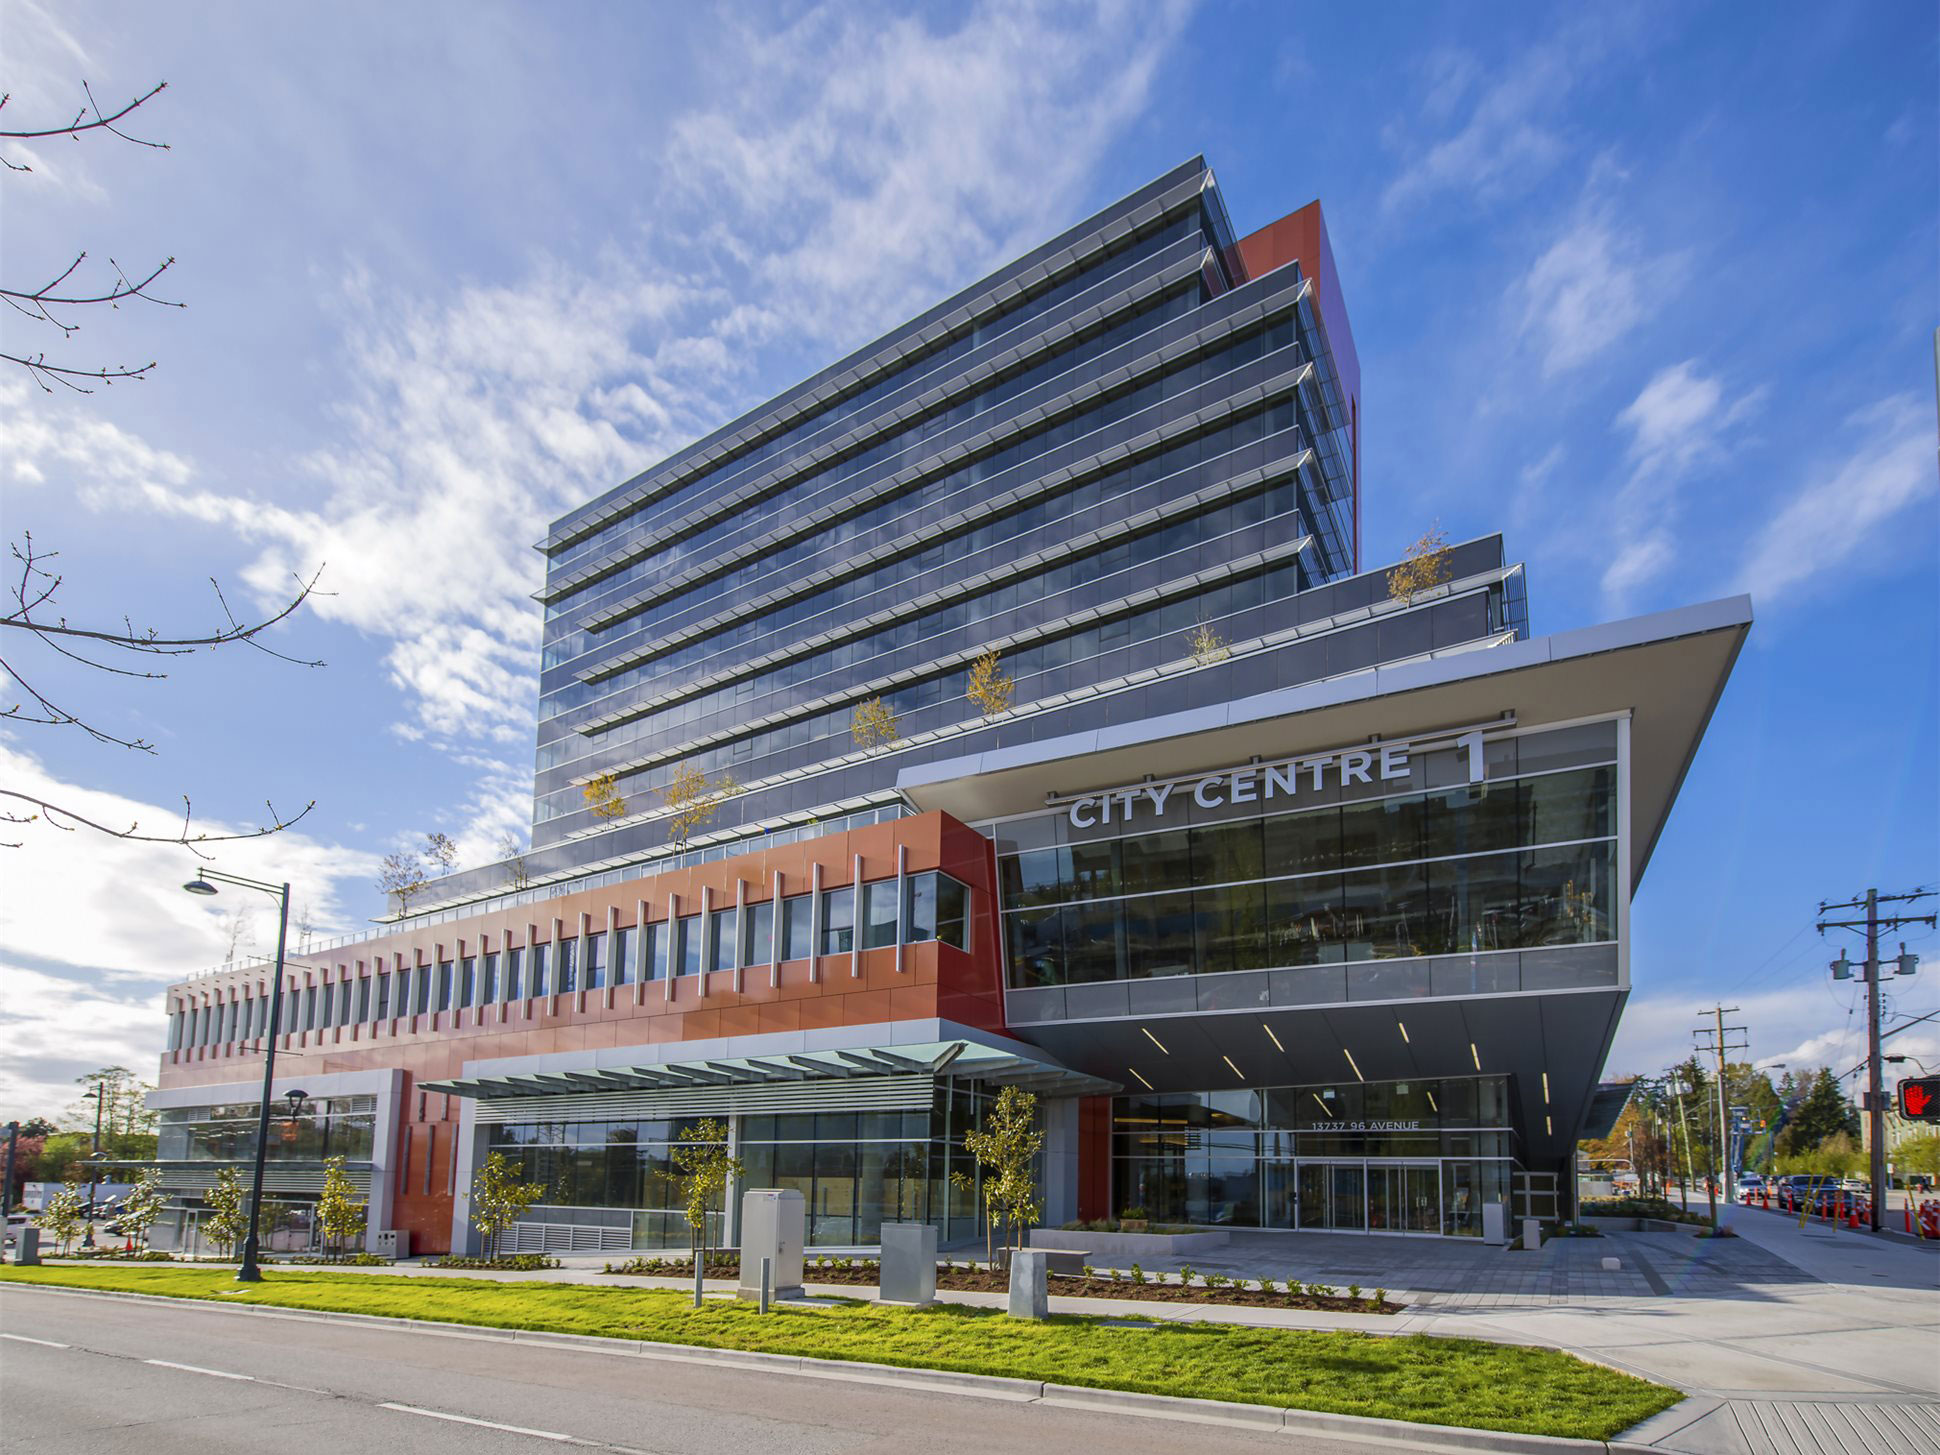 City Centre 1, CC1, Surrey, BC, Wensley Architecture, Keith Panel, Alucobond Spectra Cupral, Photography Howard Waisman